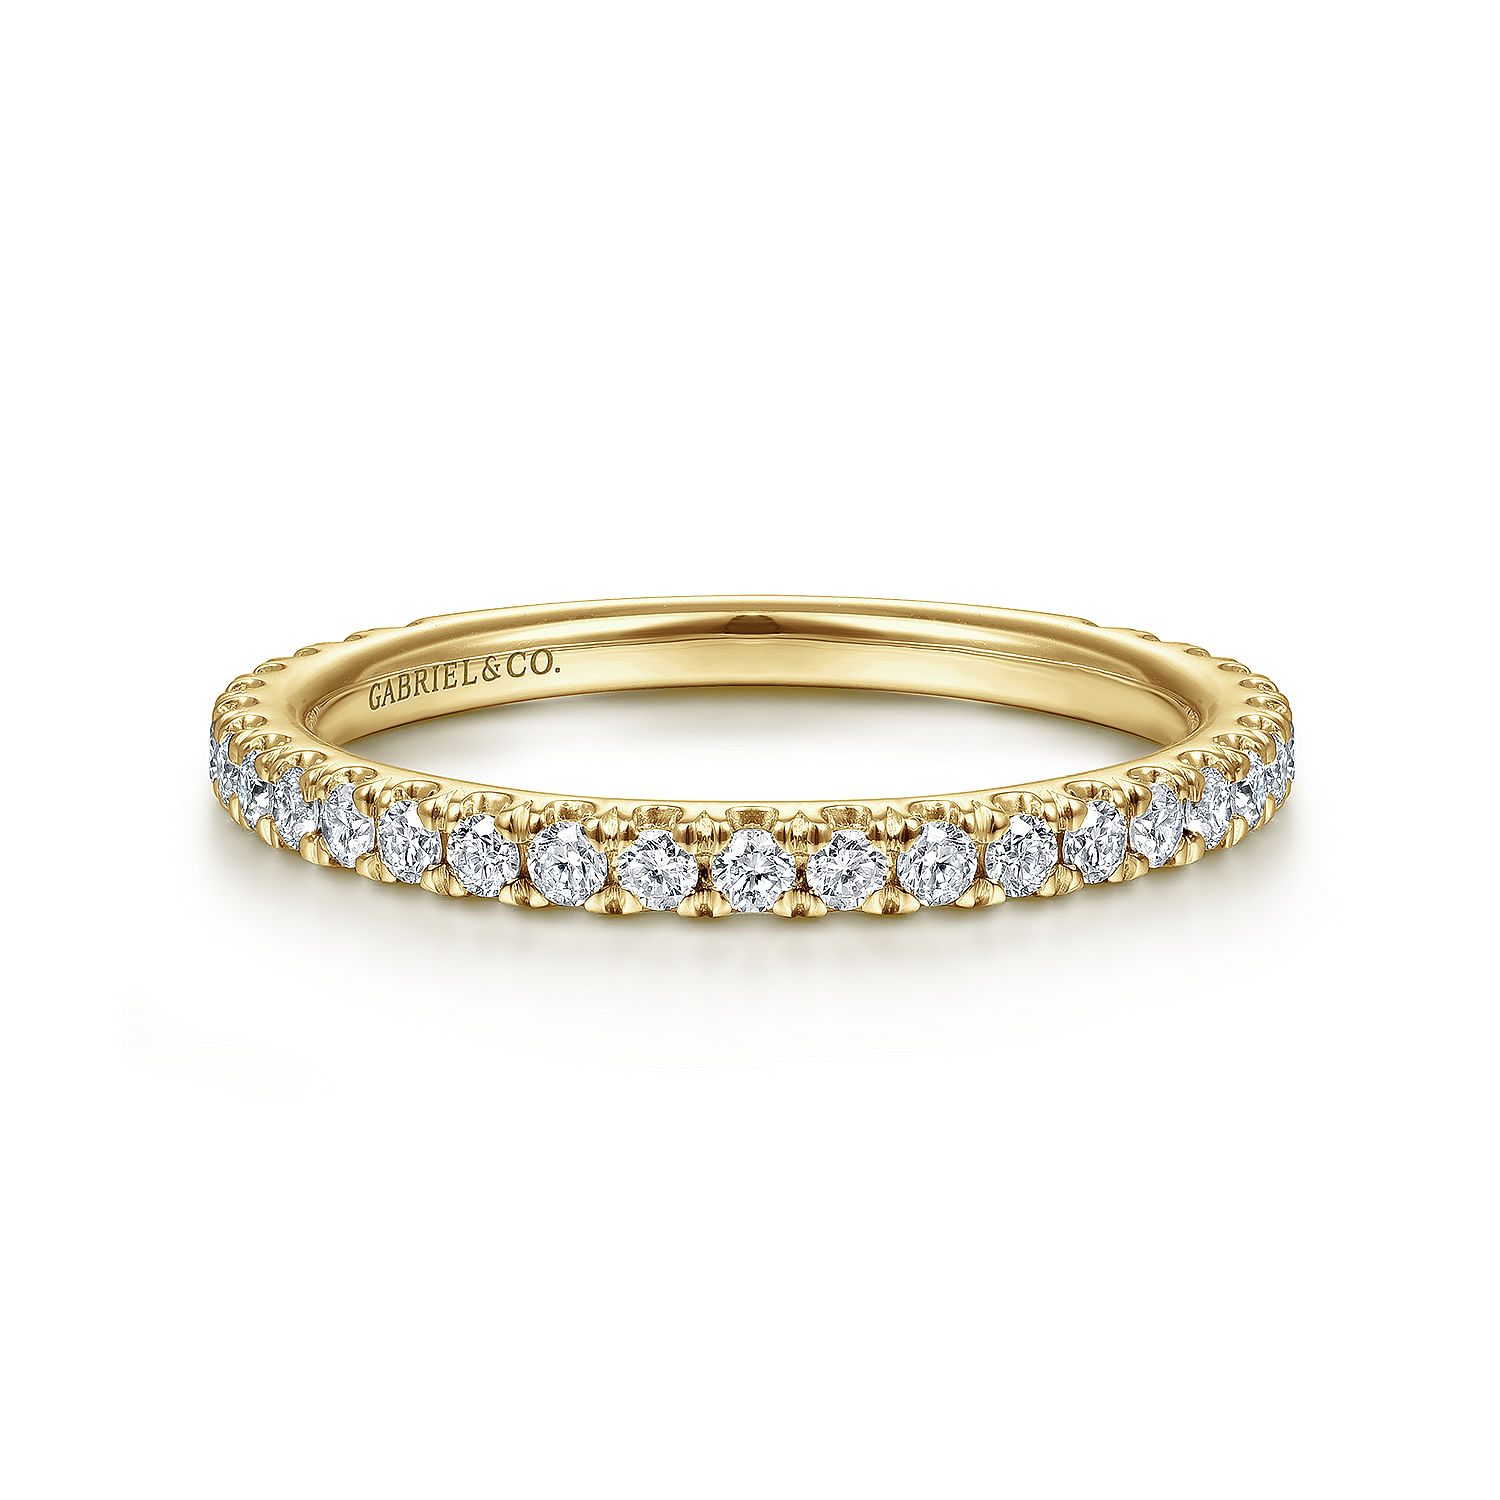 14K-Yellow-Gold-Stackable-Diamond-Ring1